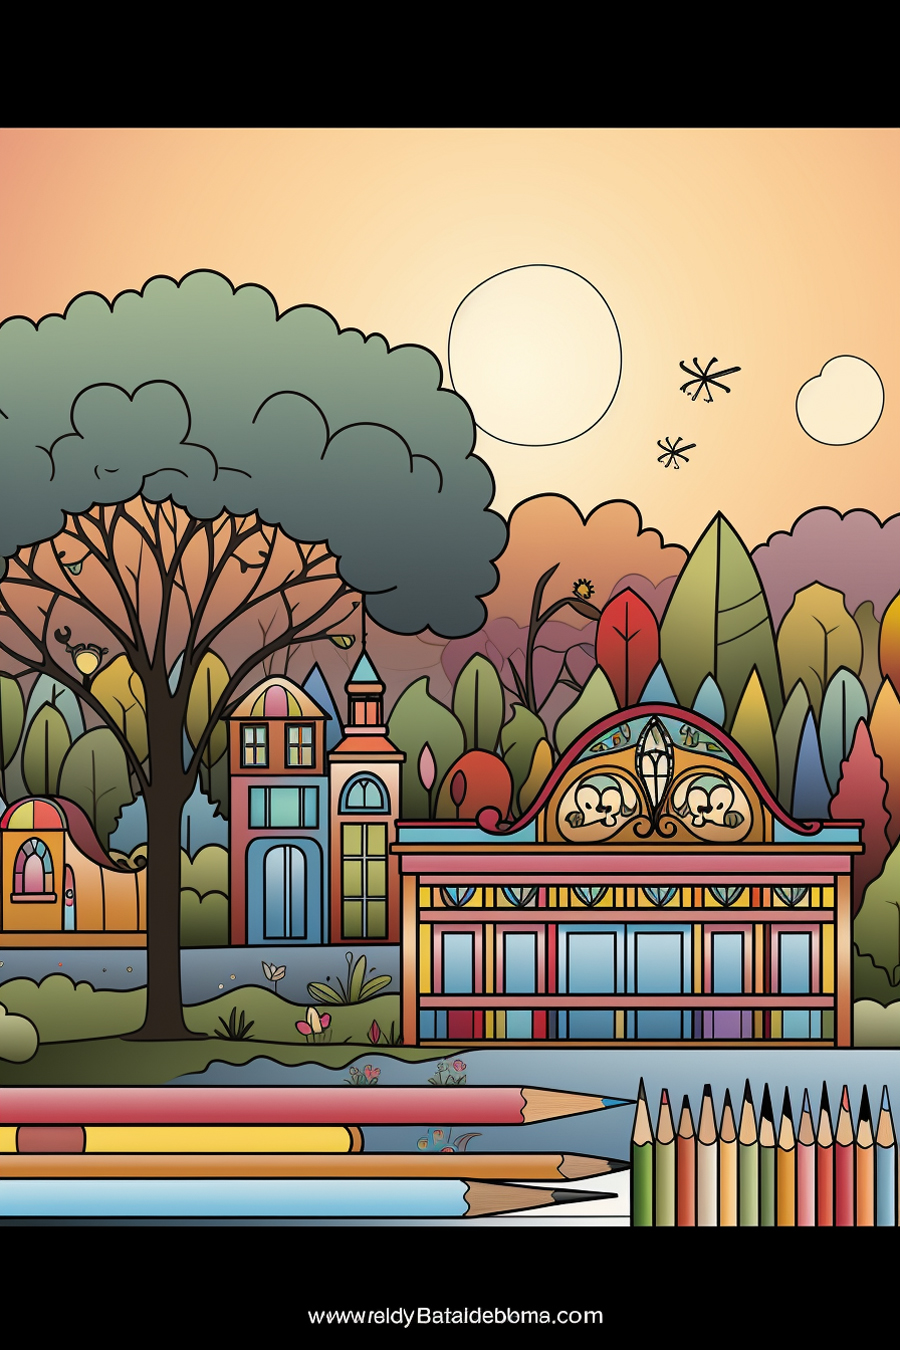 A coloring page with trees and buildings in the background.